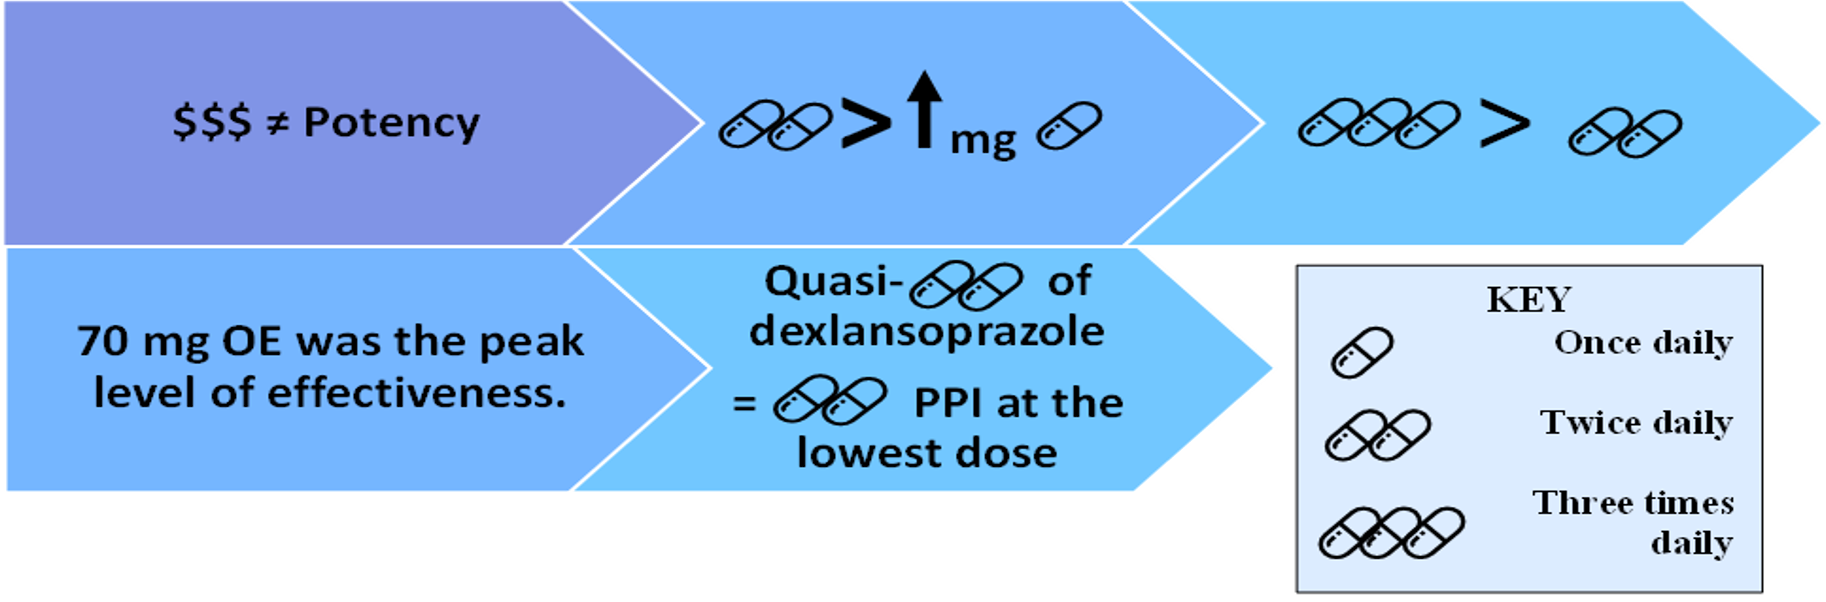 Figure 2. Key Findings from Graham et al: 1) Cost does not correlate to the potency of the PPI, 2) twice daily dosing is superior to increasing the once daily dose, 3) three times daily dosing is not superior to twice daily dosing, 4) 70 mg OE showed the peak level of effectiveness, and 5) Quasi-twice daily dosing was equivalent to twice daily PPI dosing at the lowest dose.2